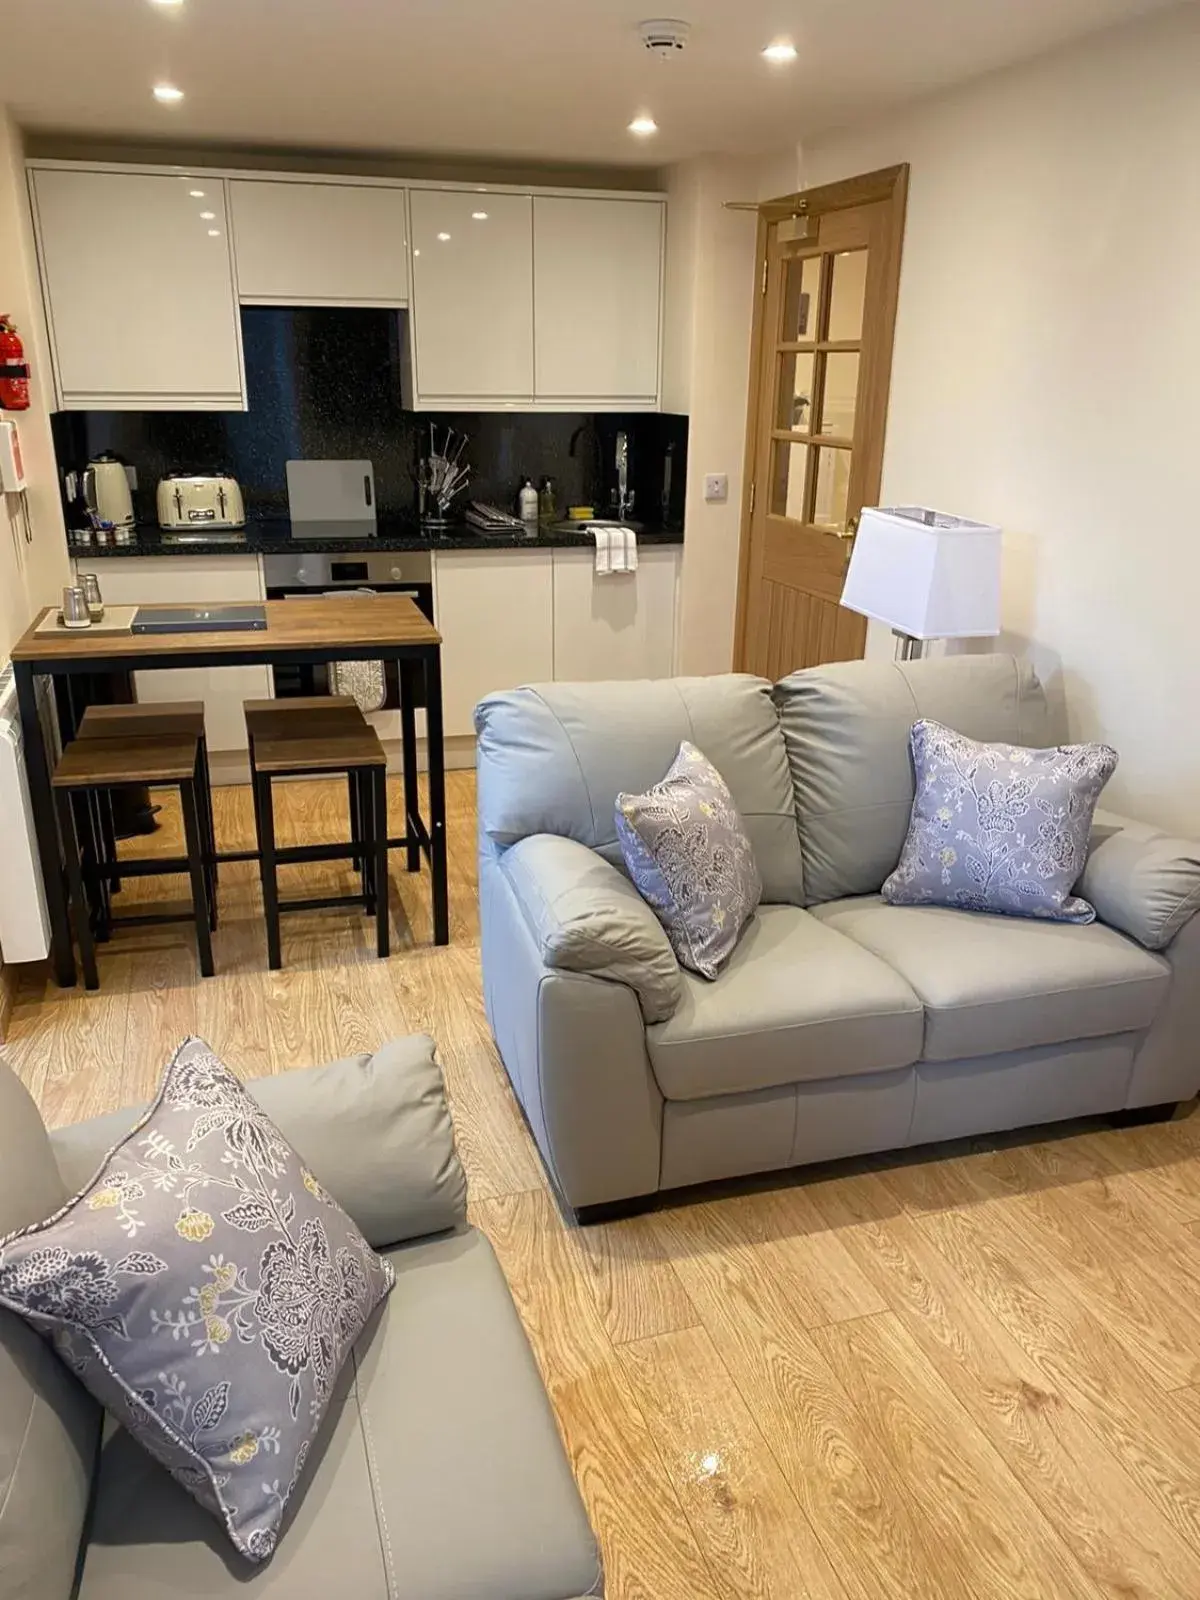 Two-Bedroom Apartment in Waverley Inn Apartments